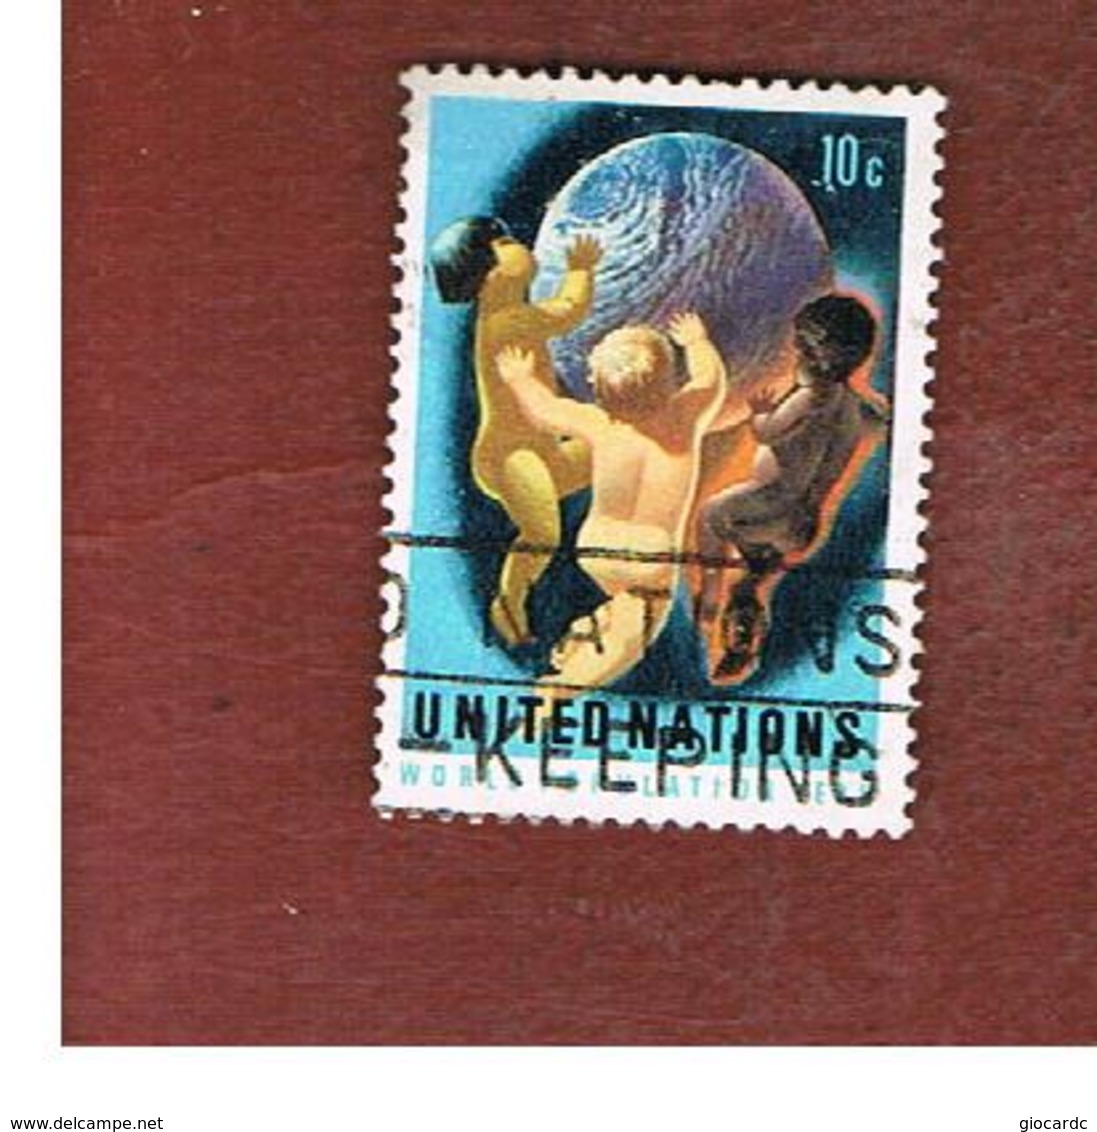 ONU (UNITED NATIONS) NEW YORK   - SG NY259   -  1974  WORLD POPULATION YEAR   - USED - Oblitérés